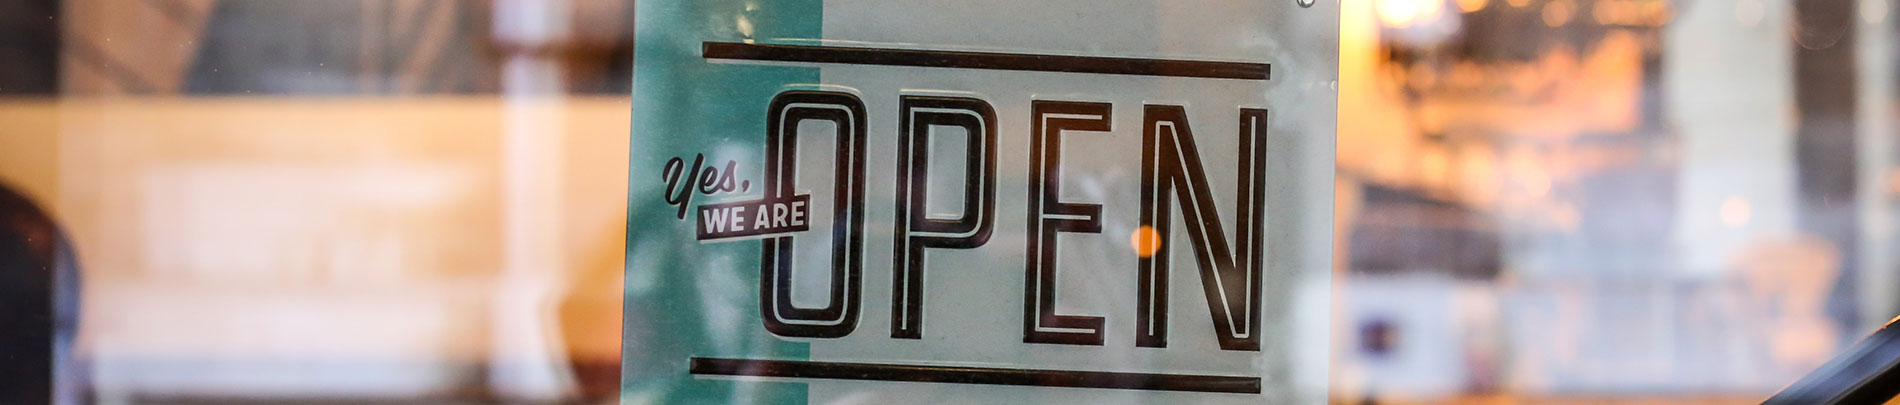 An open sign hanging in a shop window.